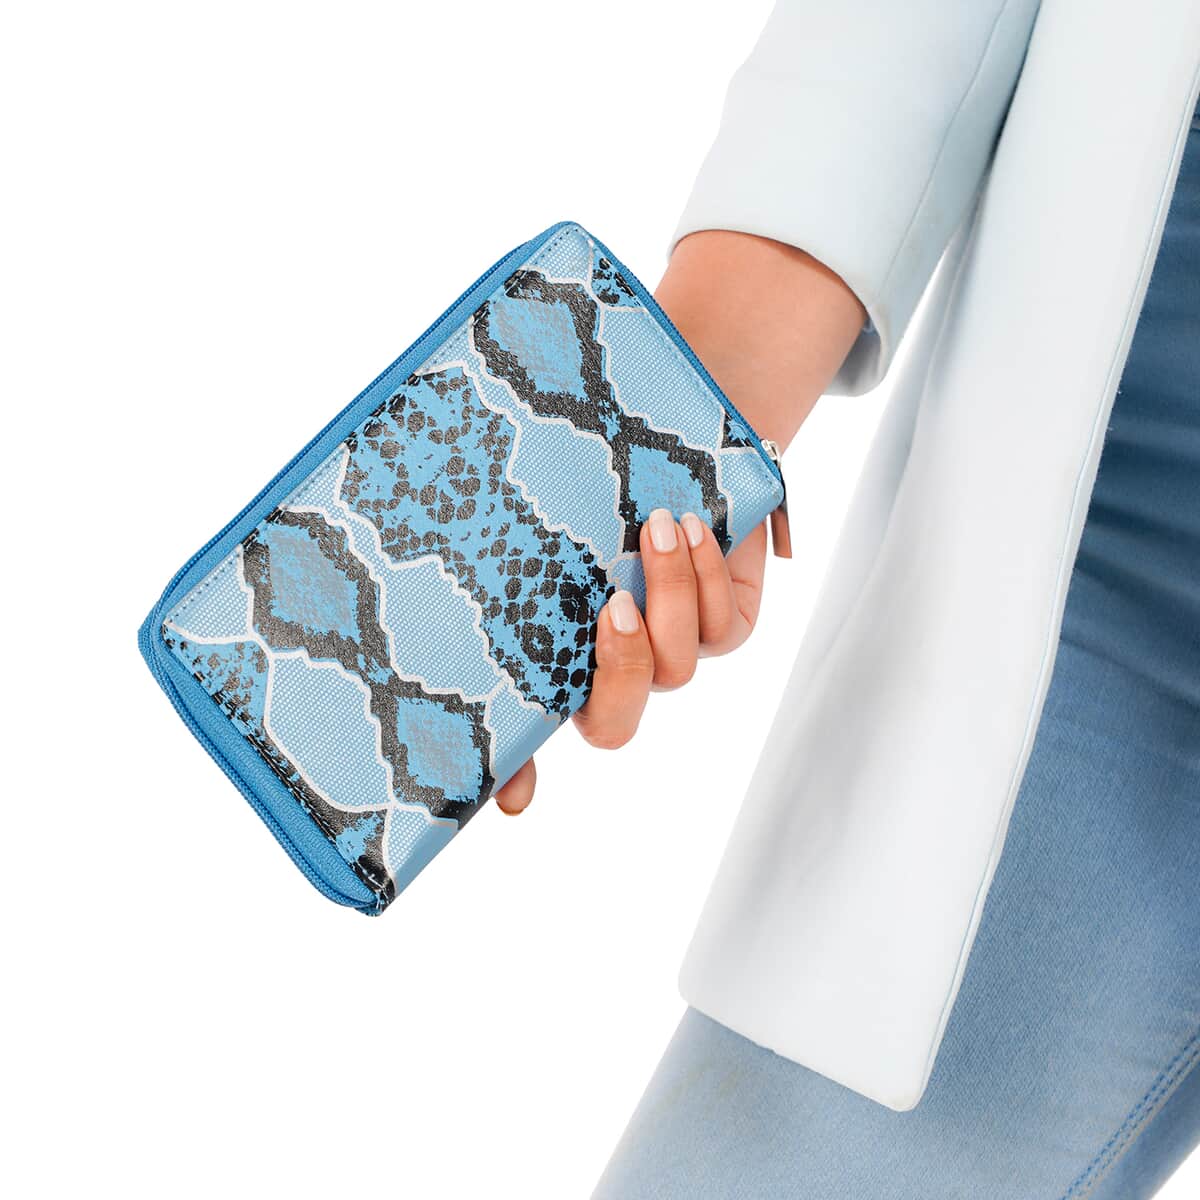 "Snakeskin Print Genuine Leather Women's Wallet SIZE: 7.5(L)x4.5(W)x0.5(H) inches COLOR: Blue" image number 1